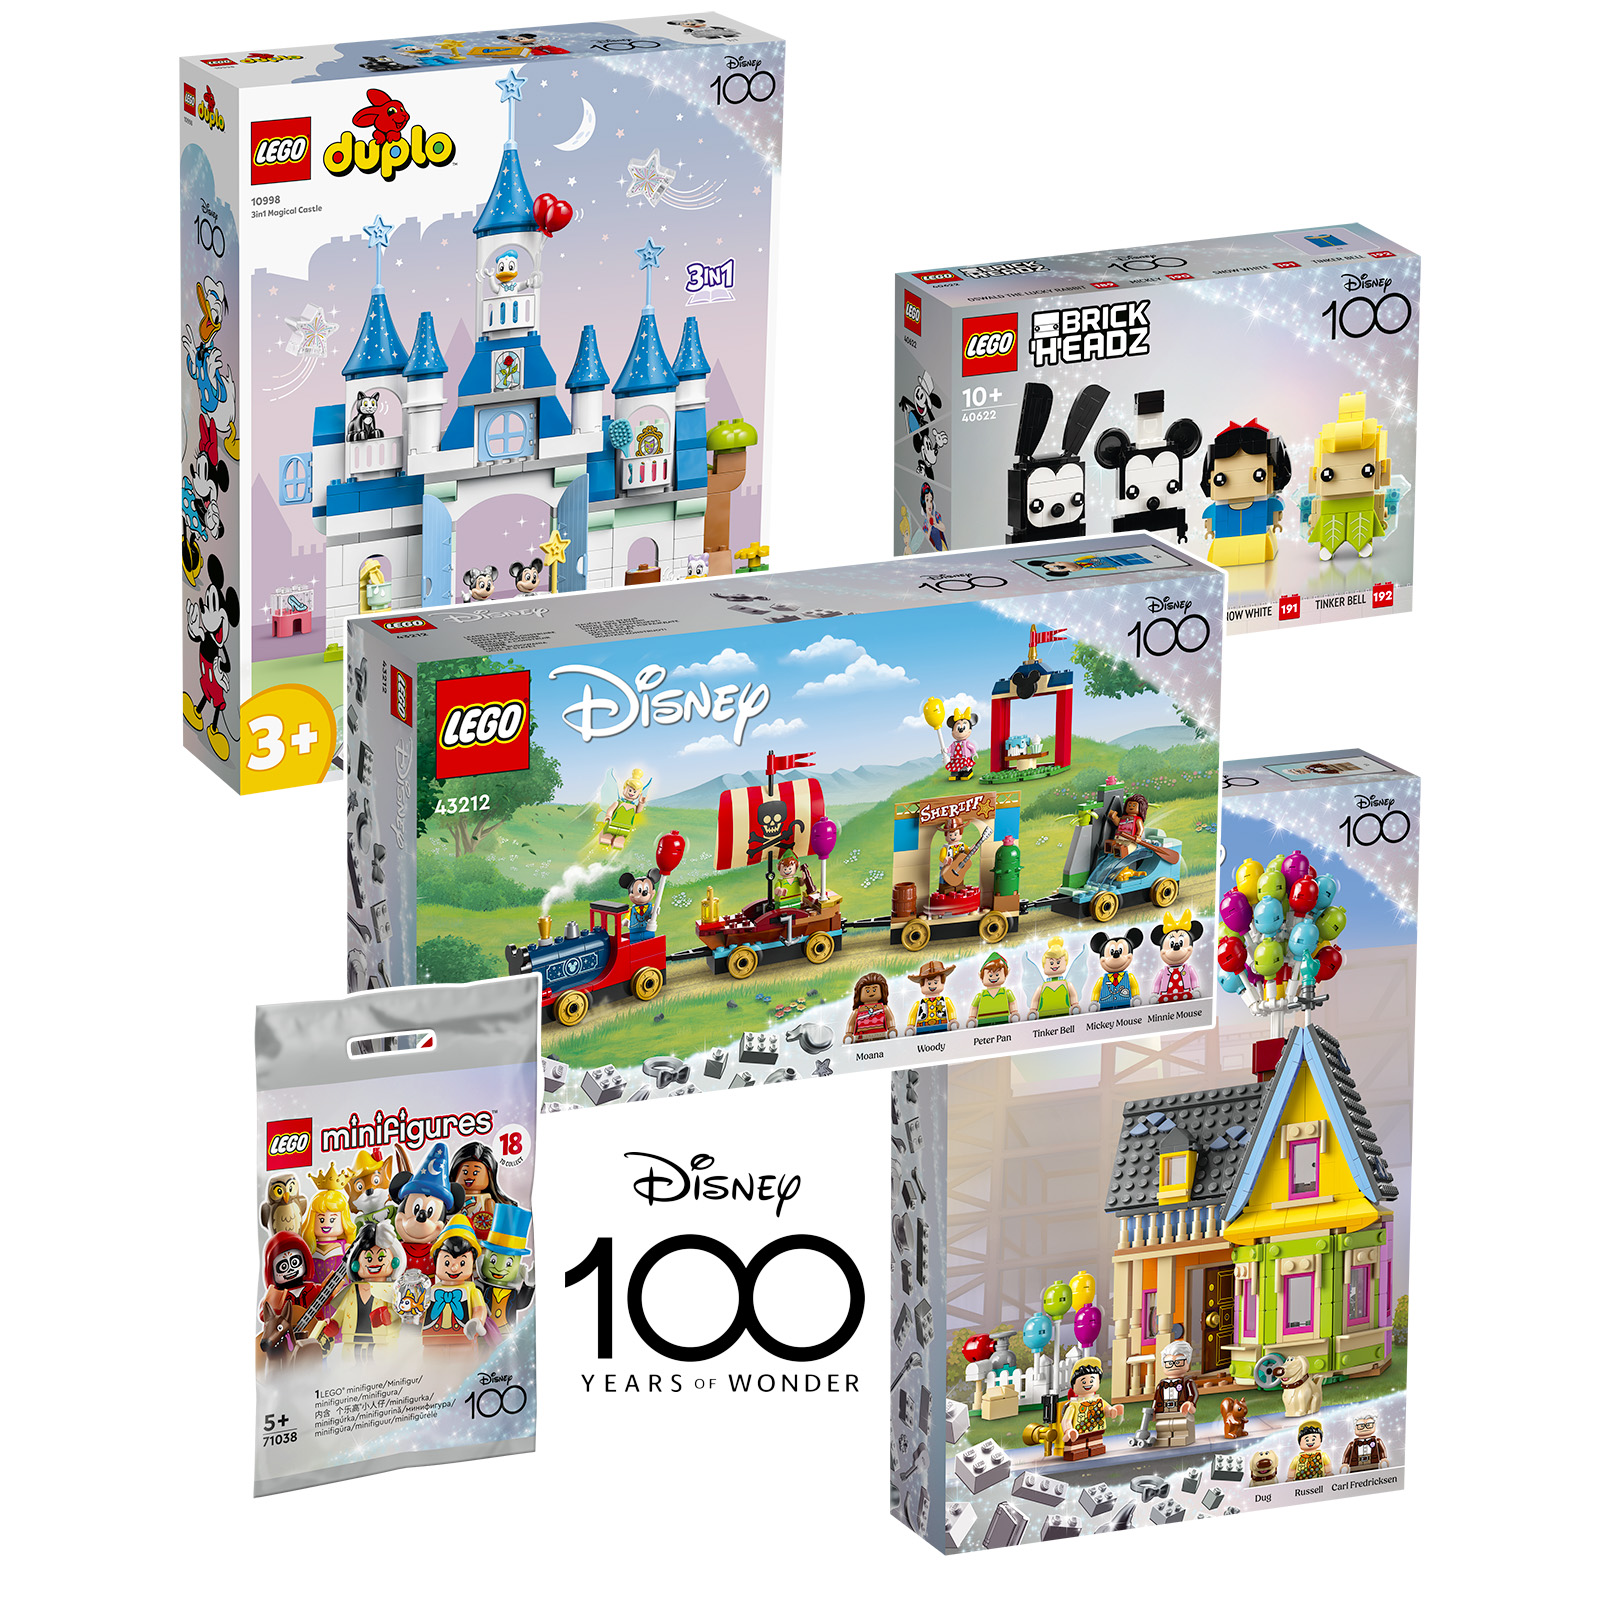 New LEGO Disney 100th Celebration 2023 the list of planned products HOTH BRICKS